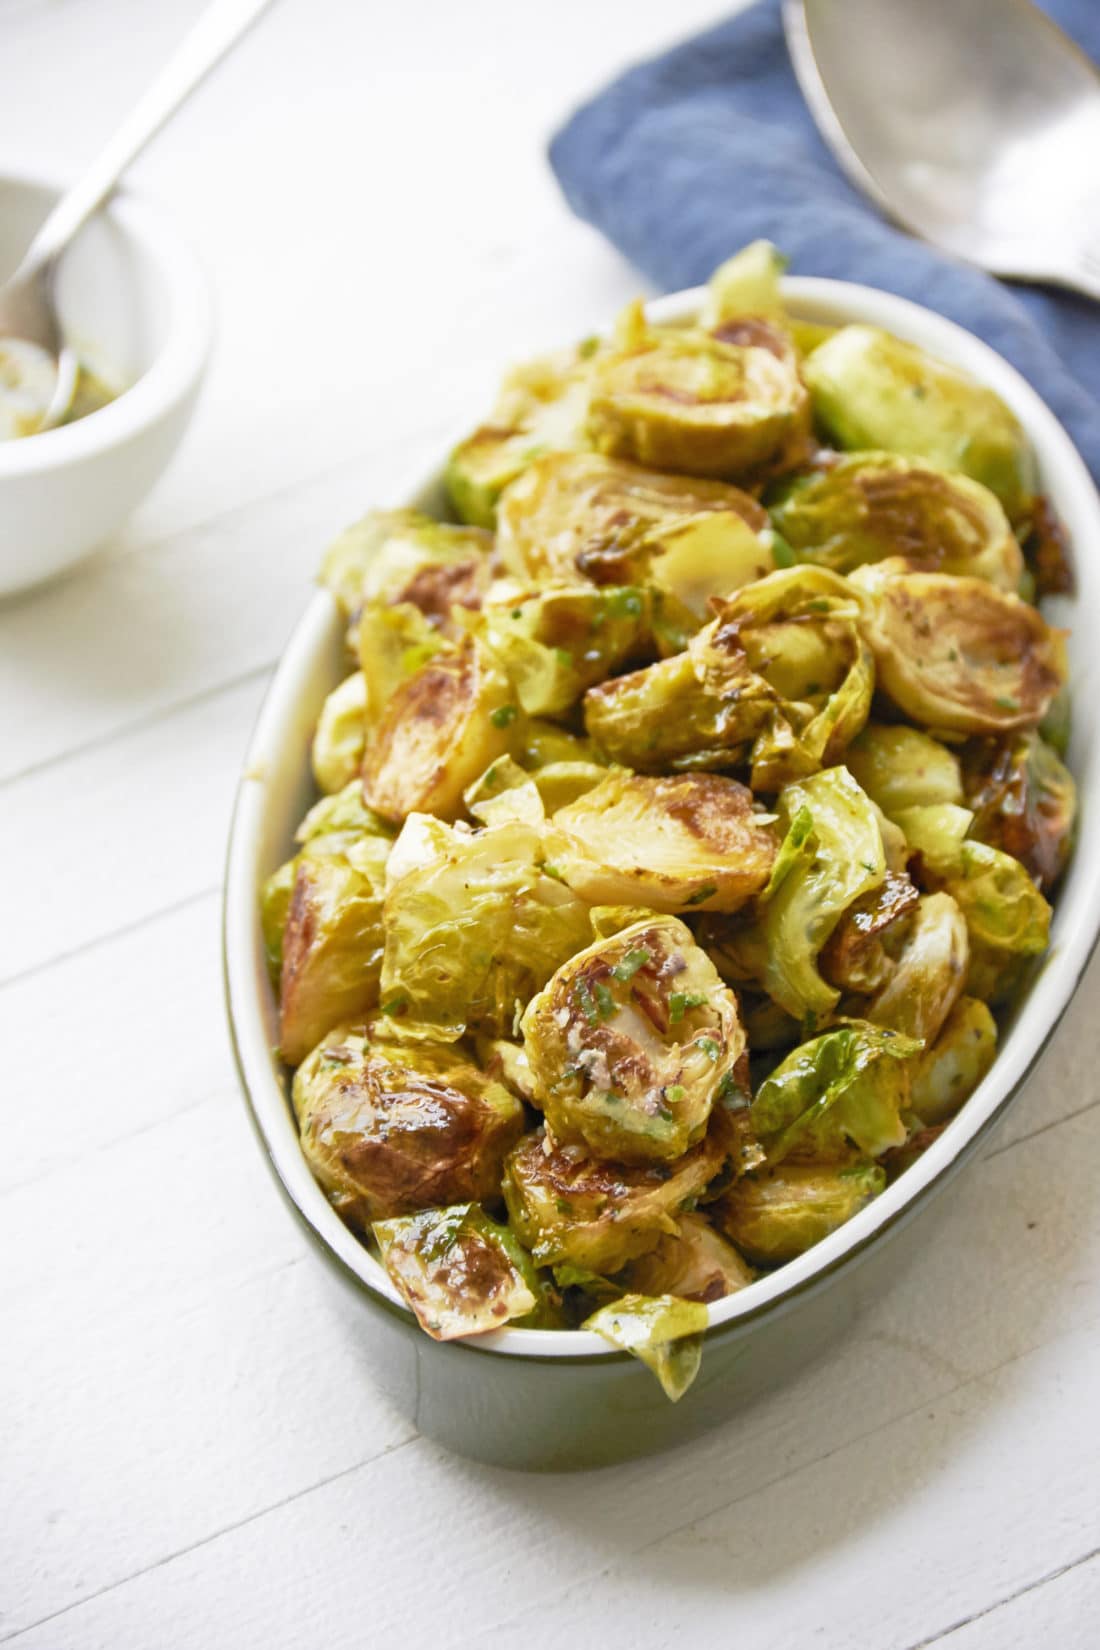 Warm Brussels Sprouts Salad with Anchovy Vinaigrette / Mia / Katie Workman / themom100.com